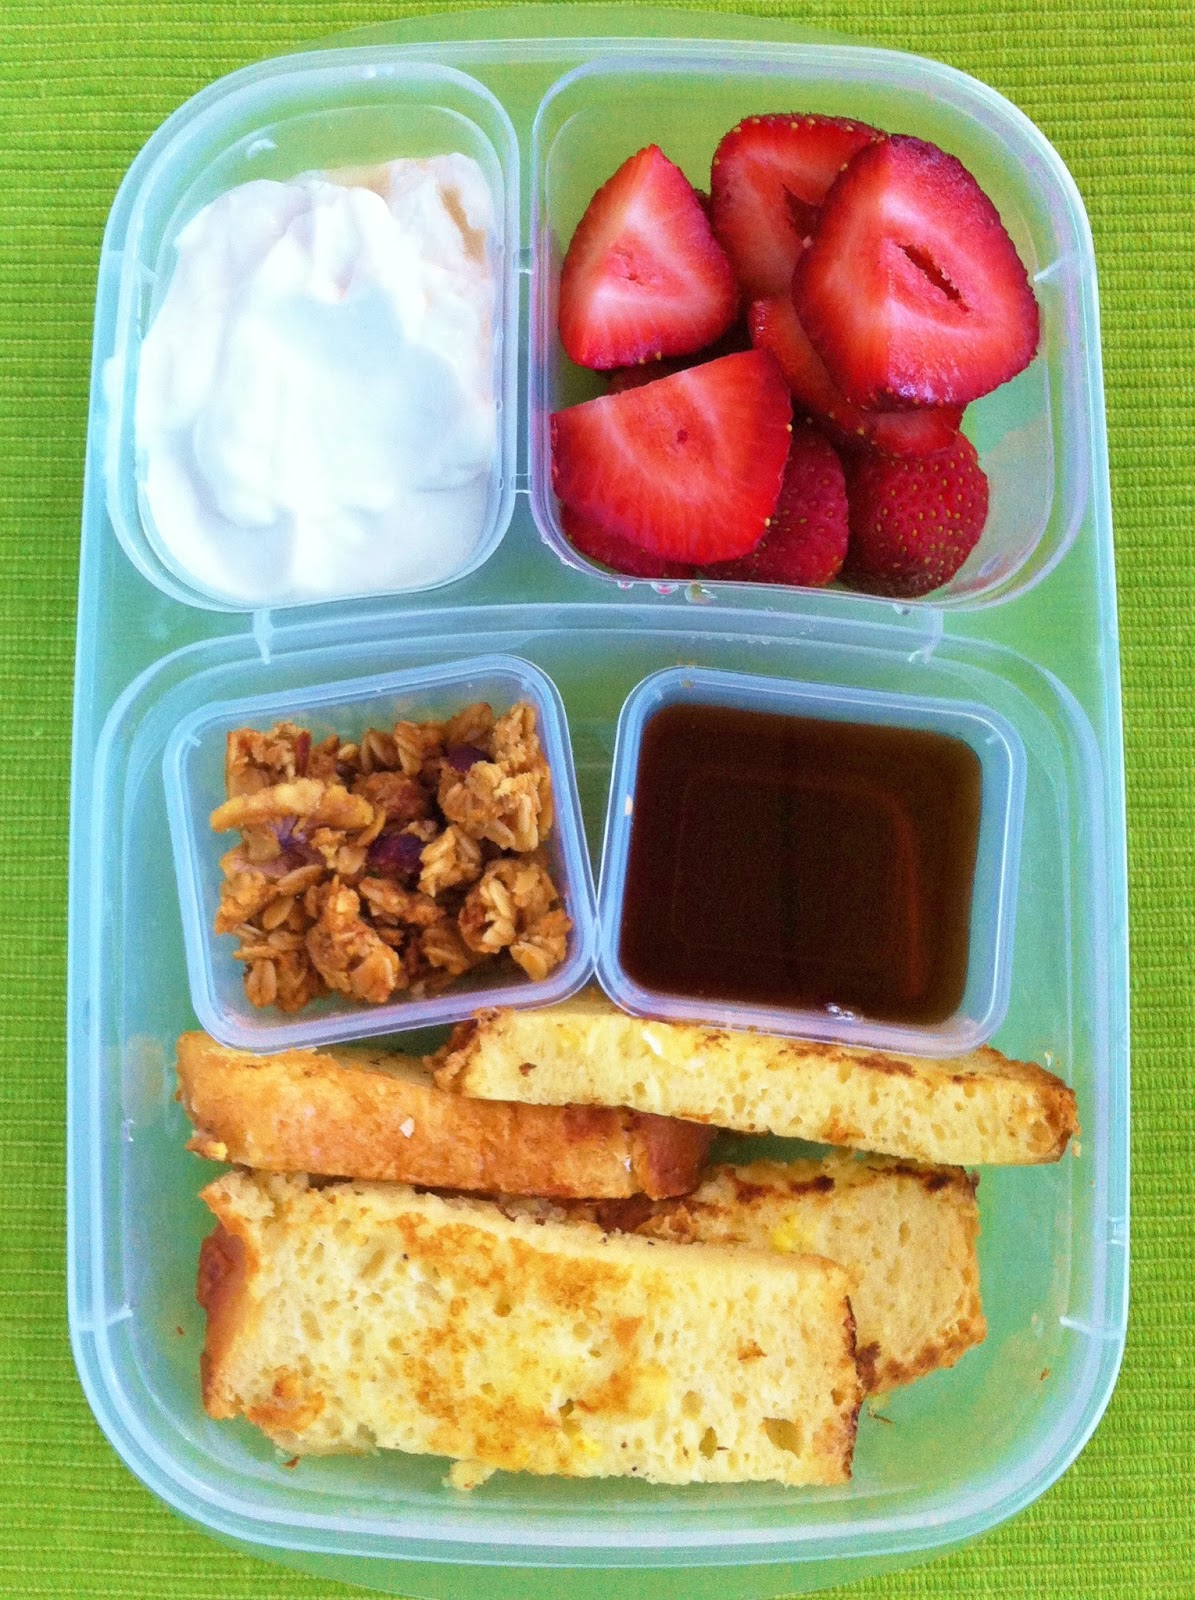 Operation: Lunch Box: Day 68 - French Toast Sticks